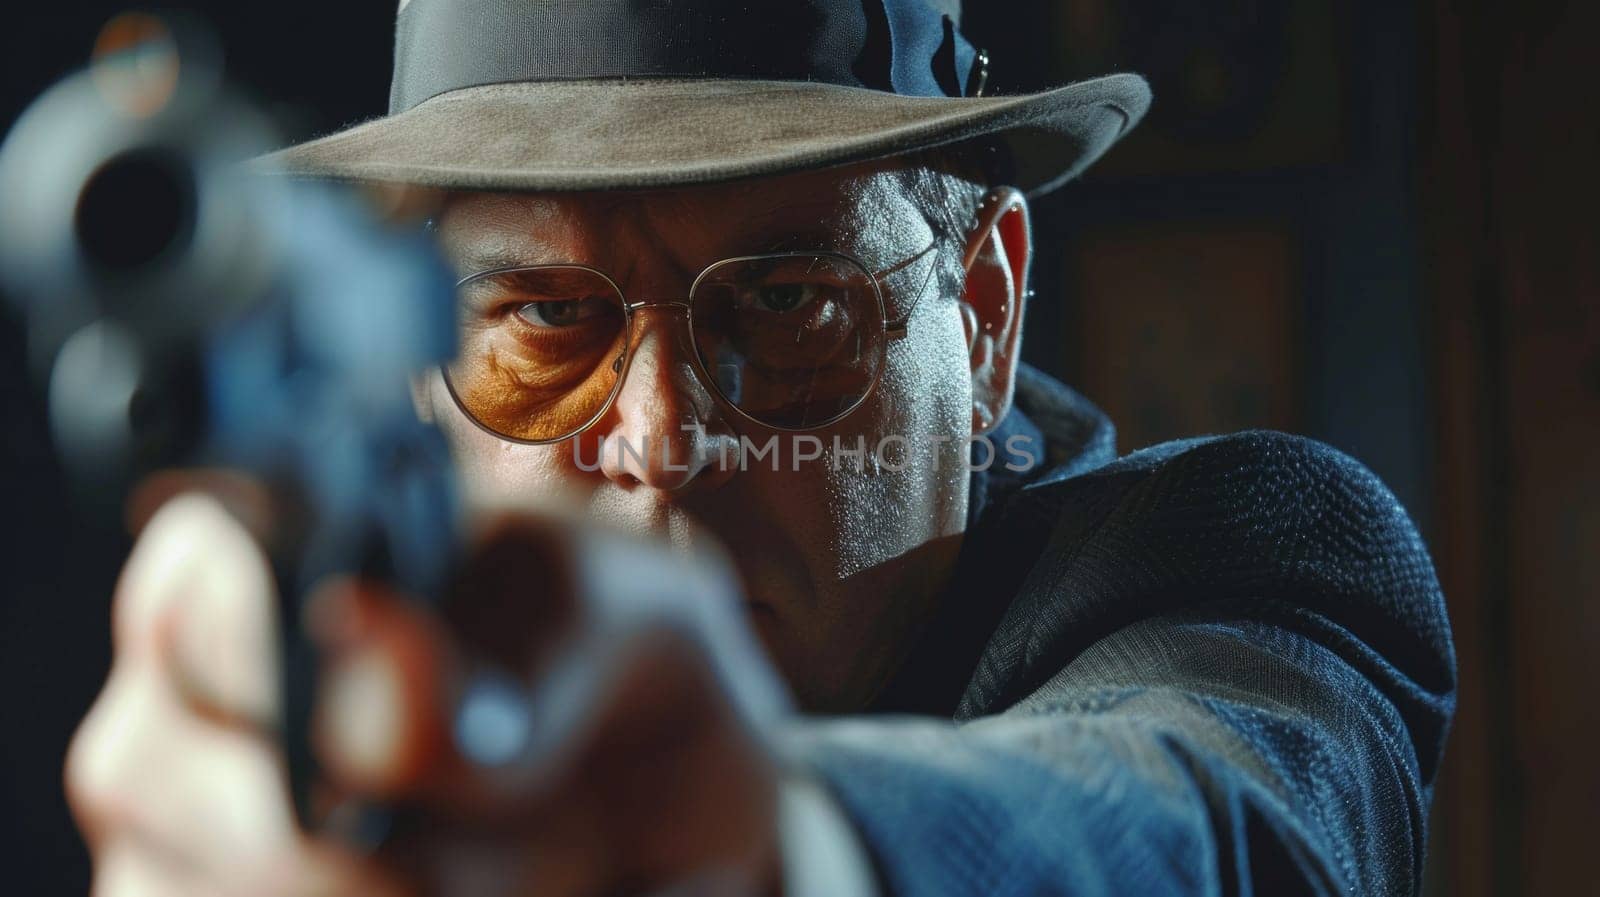 A man in a hat and glasses aiming at something with his gun